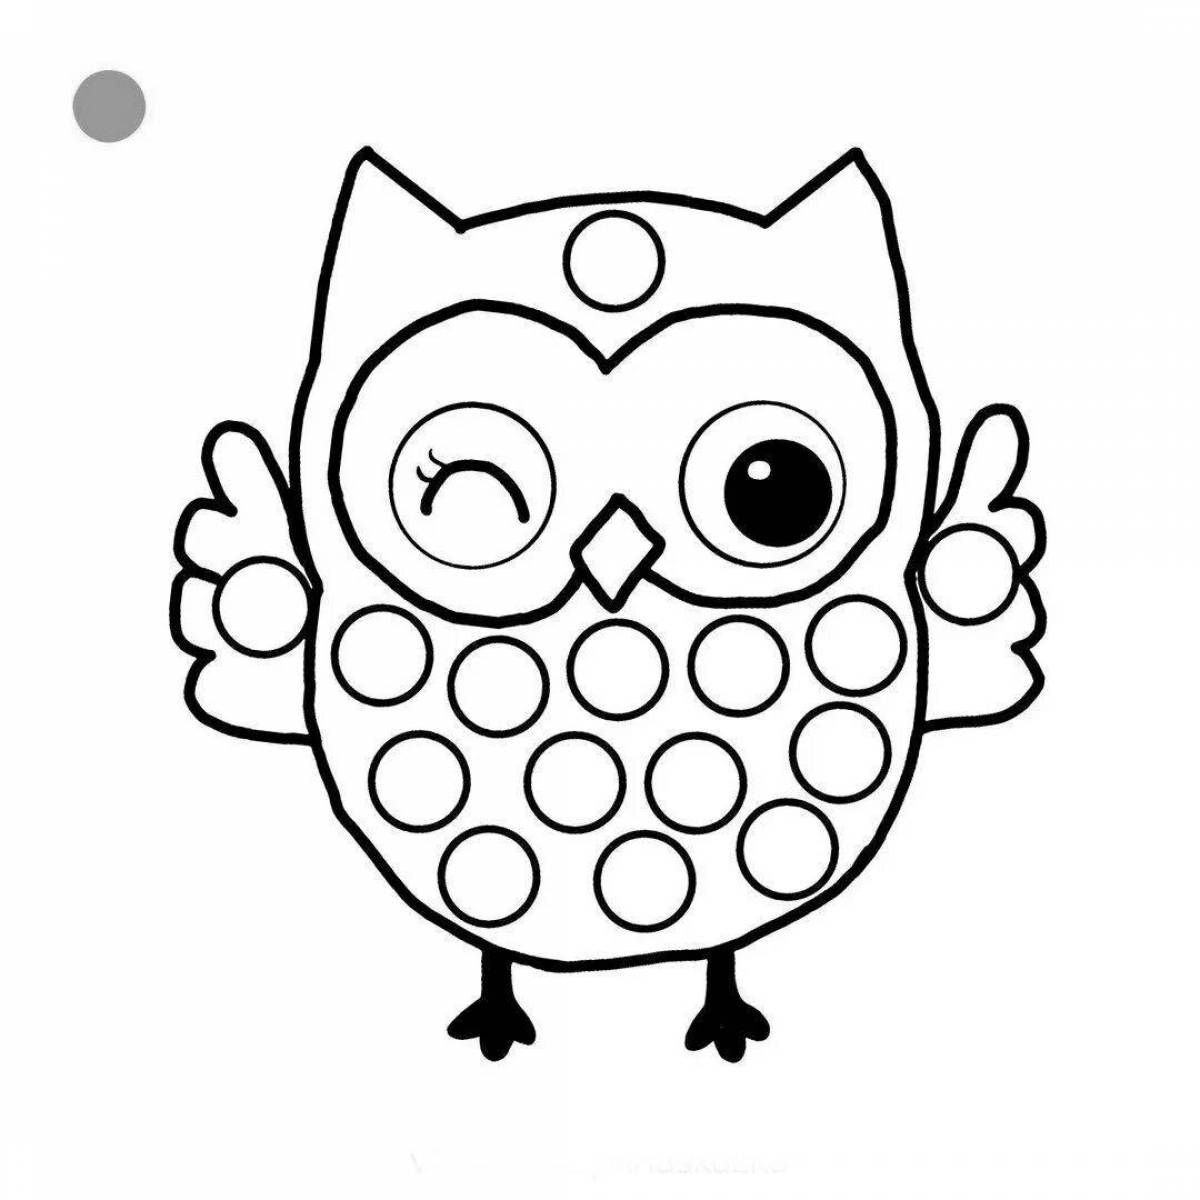 Wonderful owlet coloring book for kids